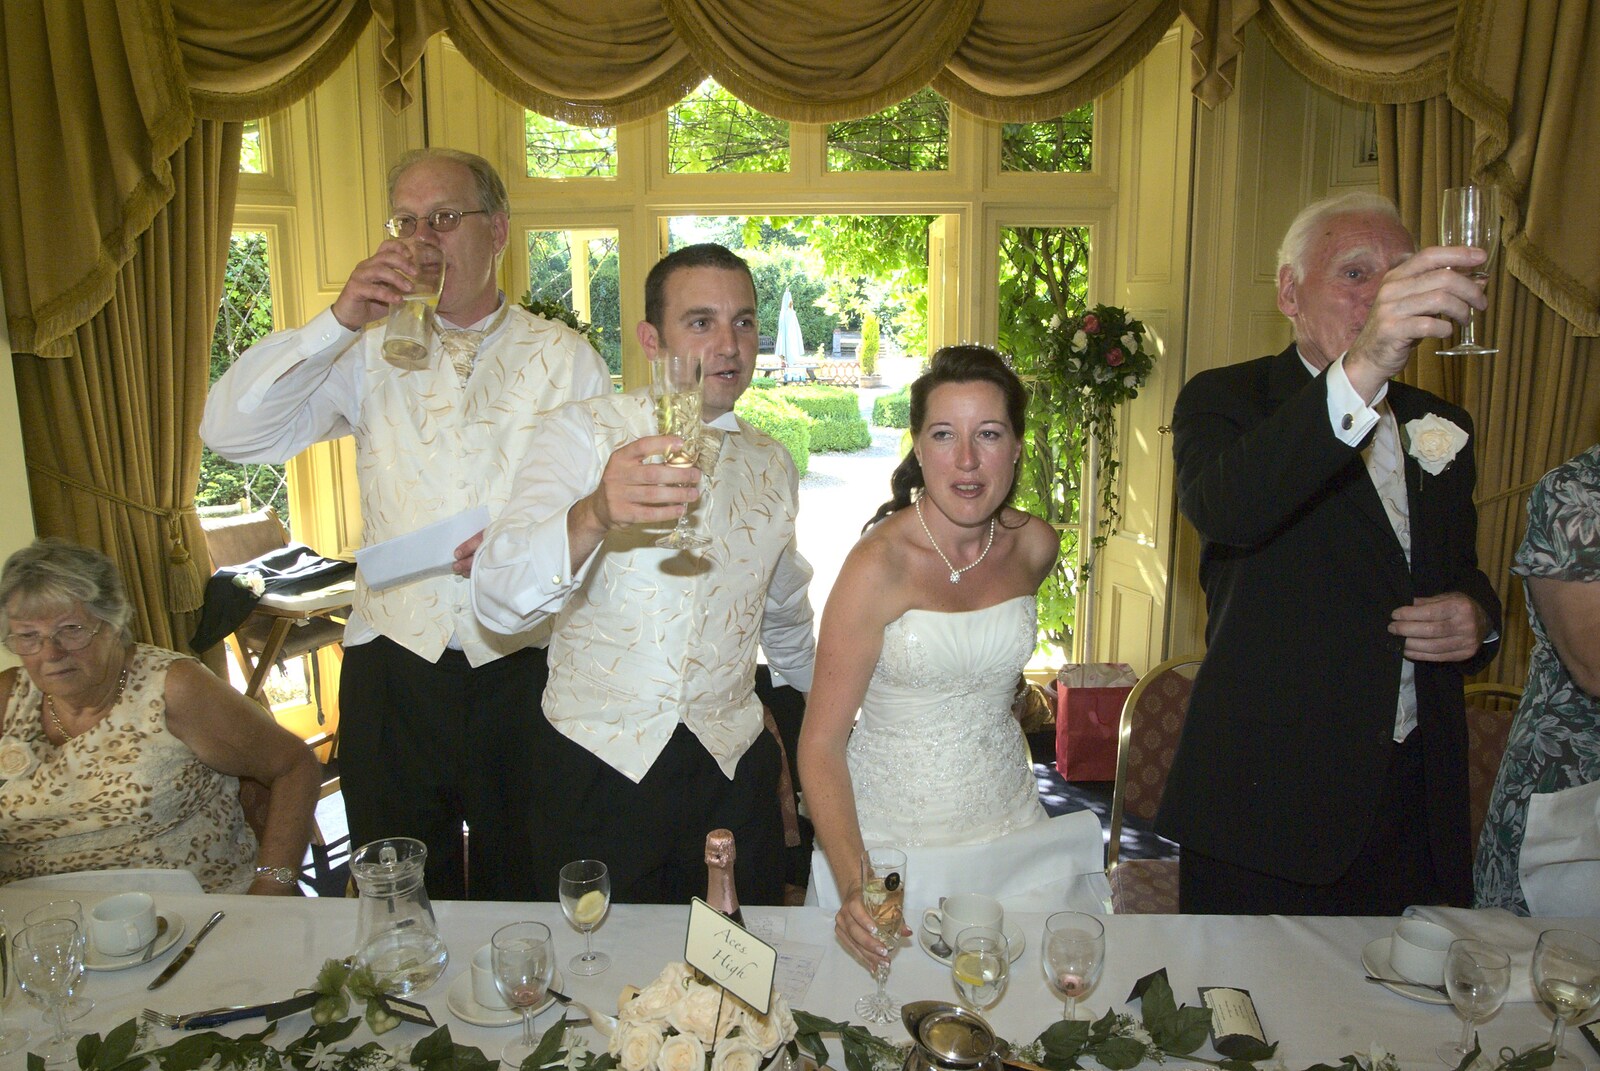 Another toast from Clive and Suzanne's Wedding, Oakley and Brome, Suffolk - 10th July 2010